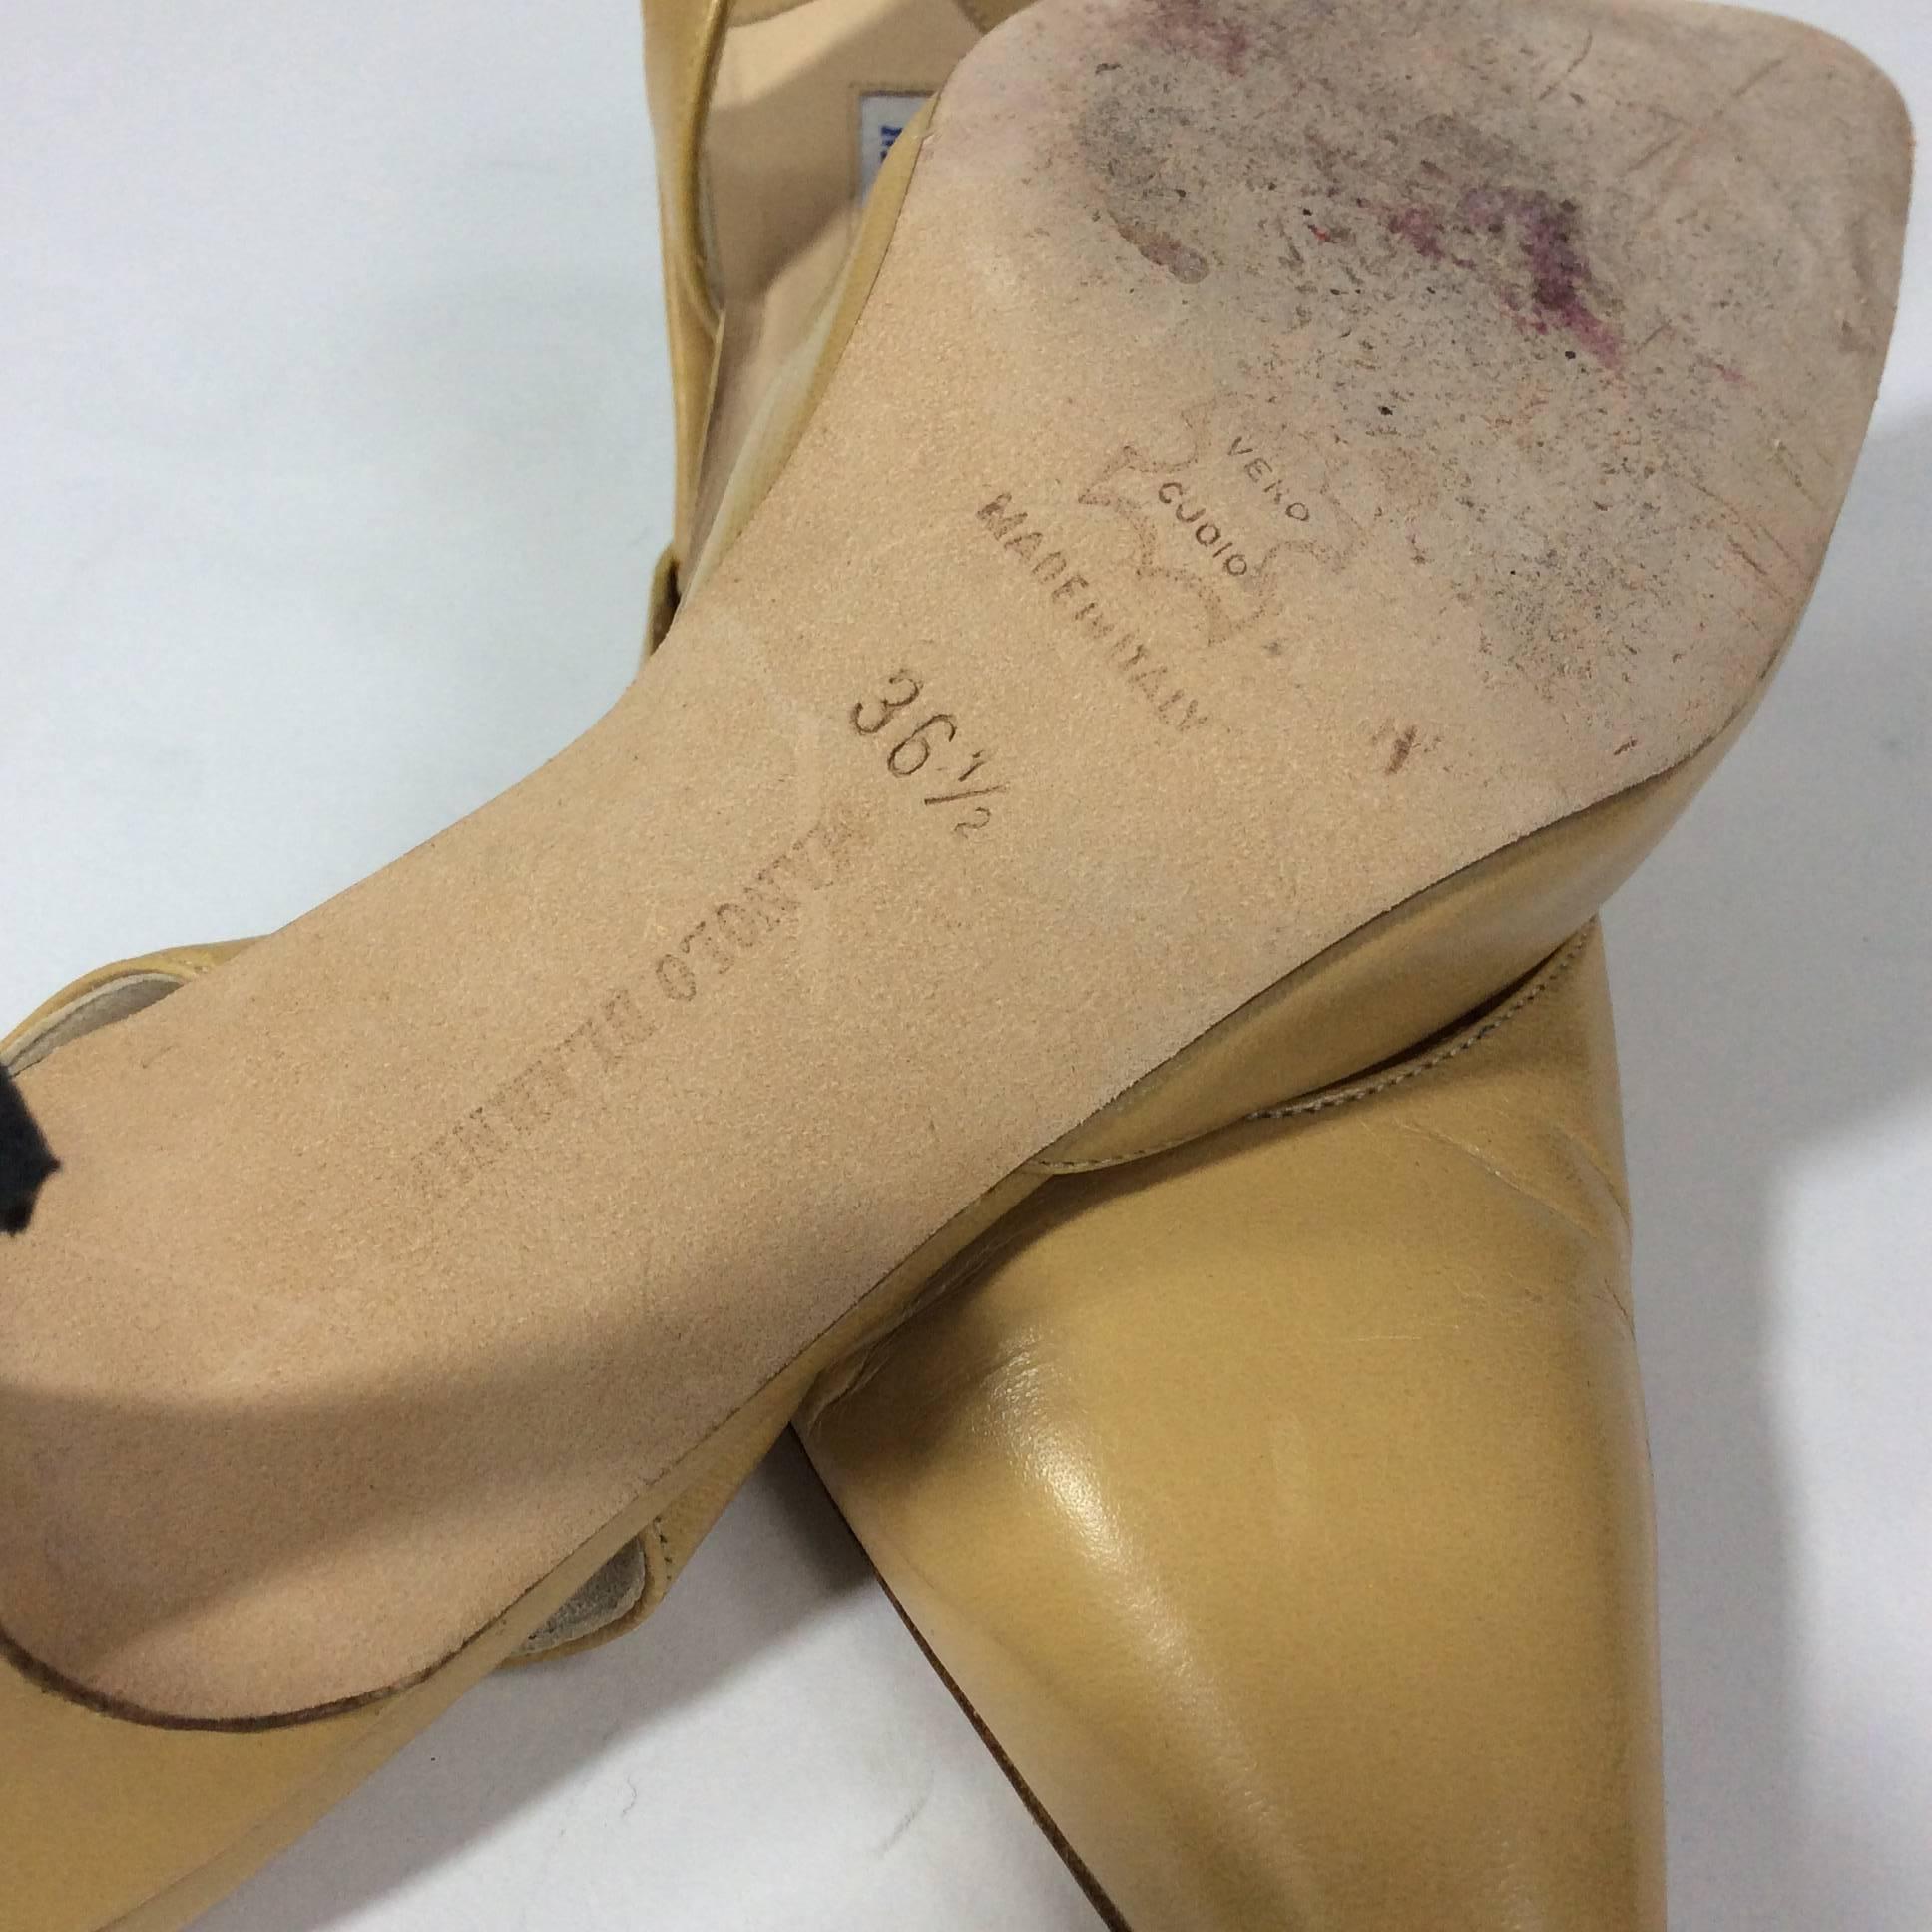 Manolo Blahnik Tan Pointed Heels with Heel Strap with a 1 inch heel. Size is a size 36.5 which equates to a 6 as the shoe runs small. Shoe is in great condition with minimal wear on the sole. 